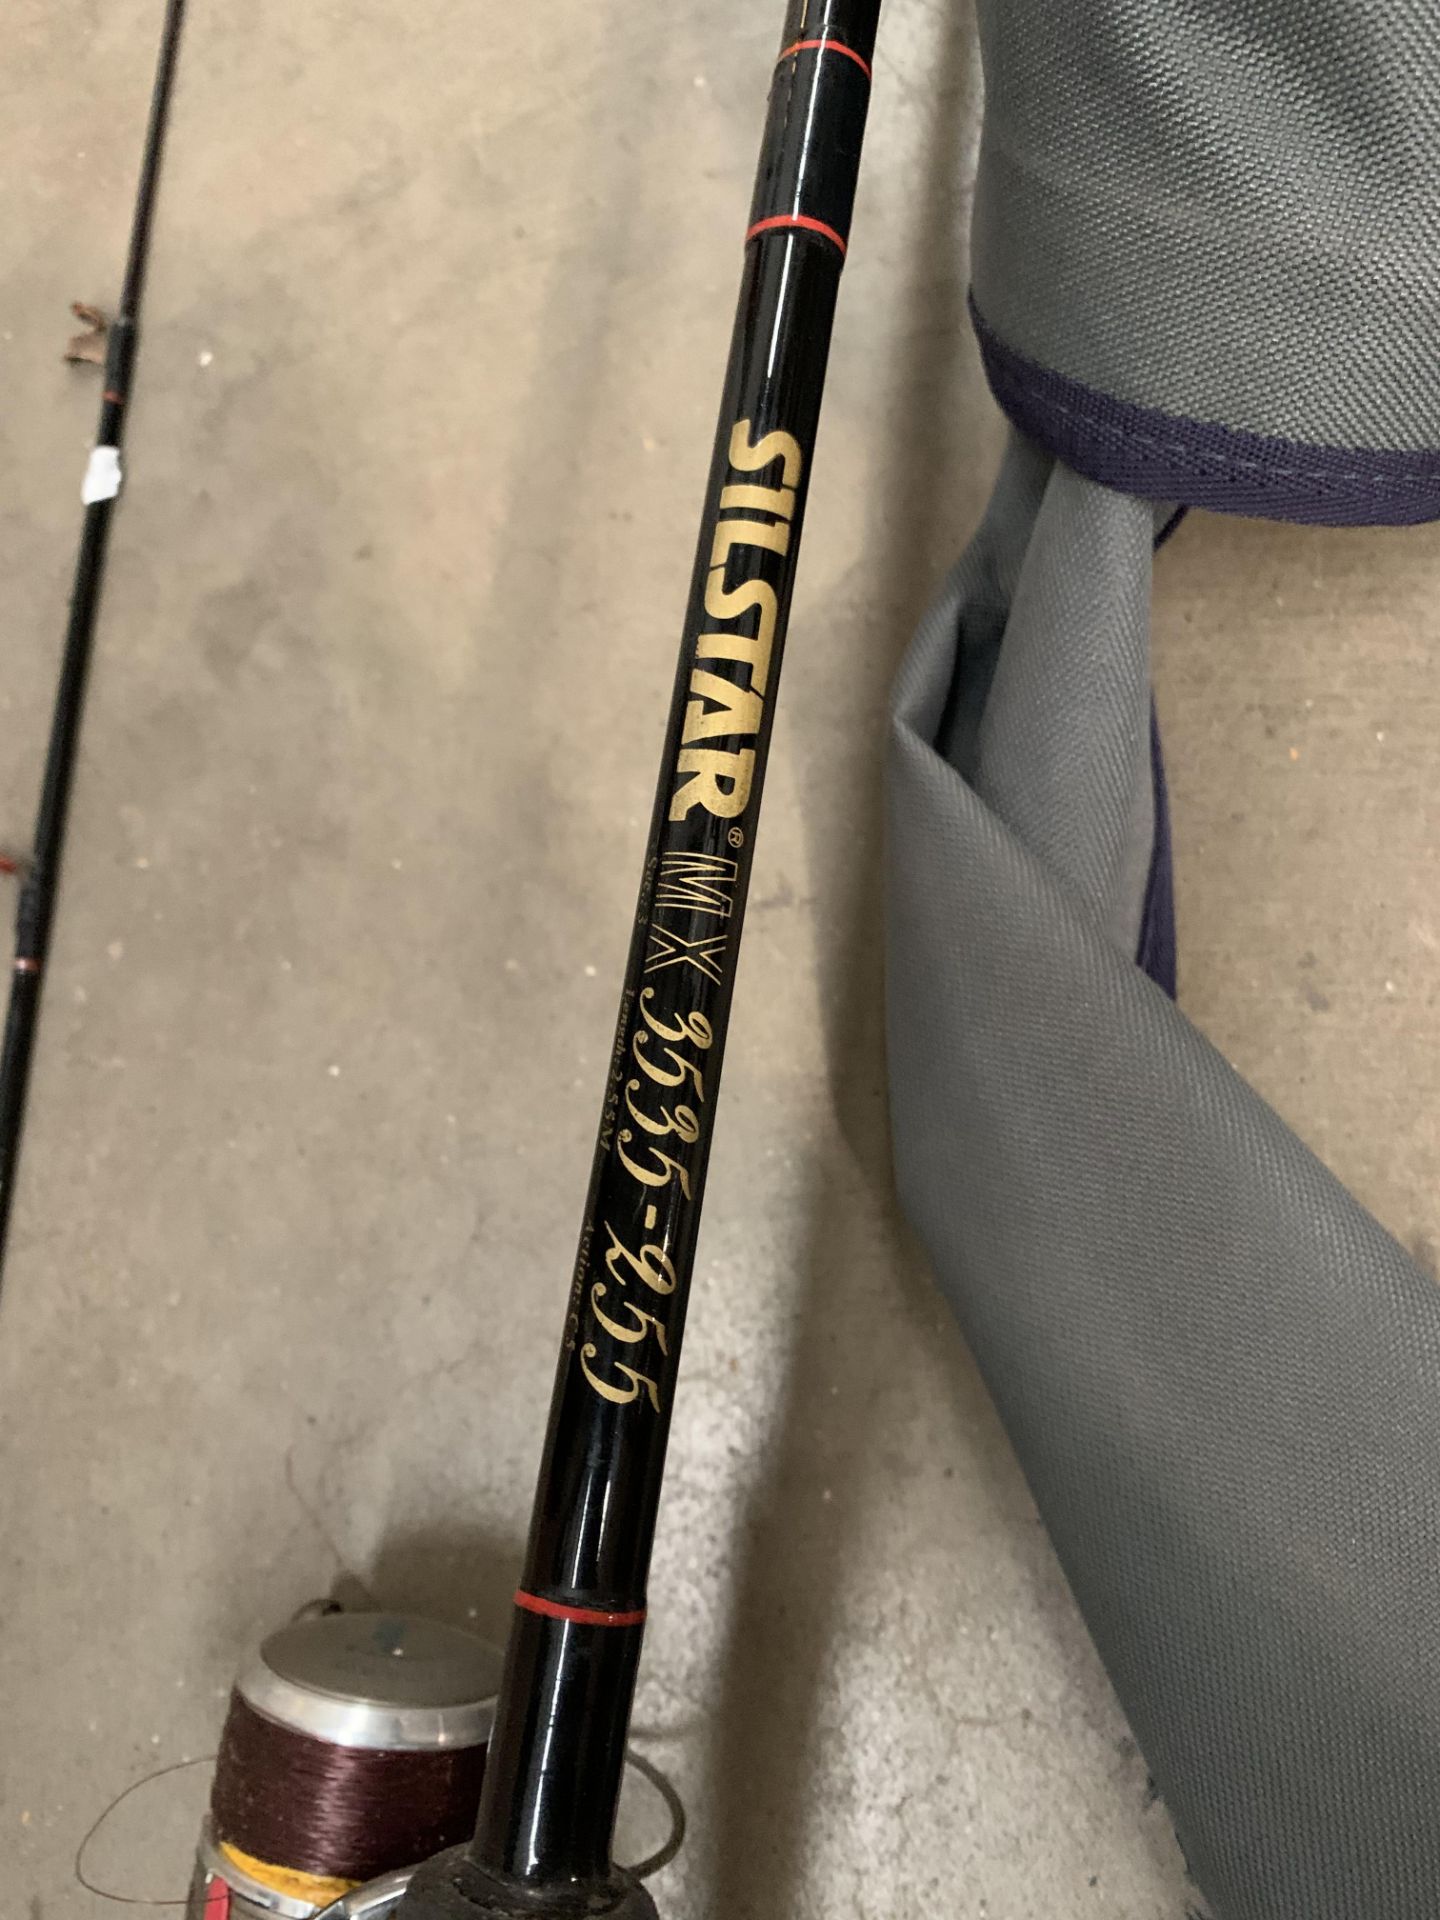 Silstar MX 3535-255 two piece fishing rod with Mitchell MC401 reel - Image 3 of 3